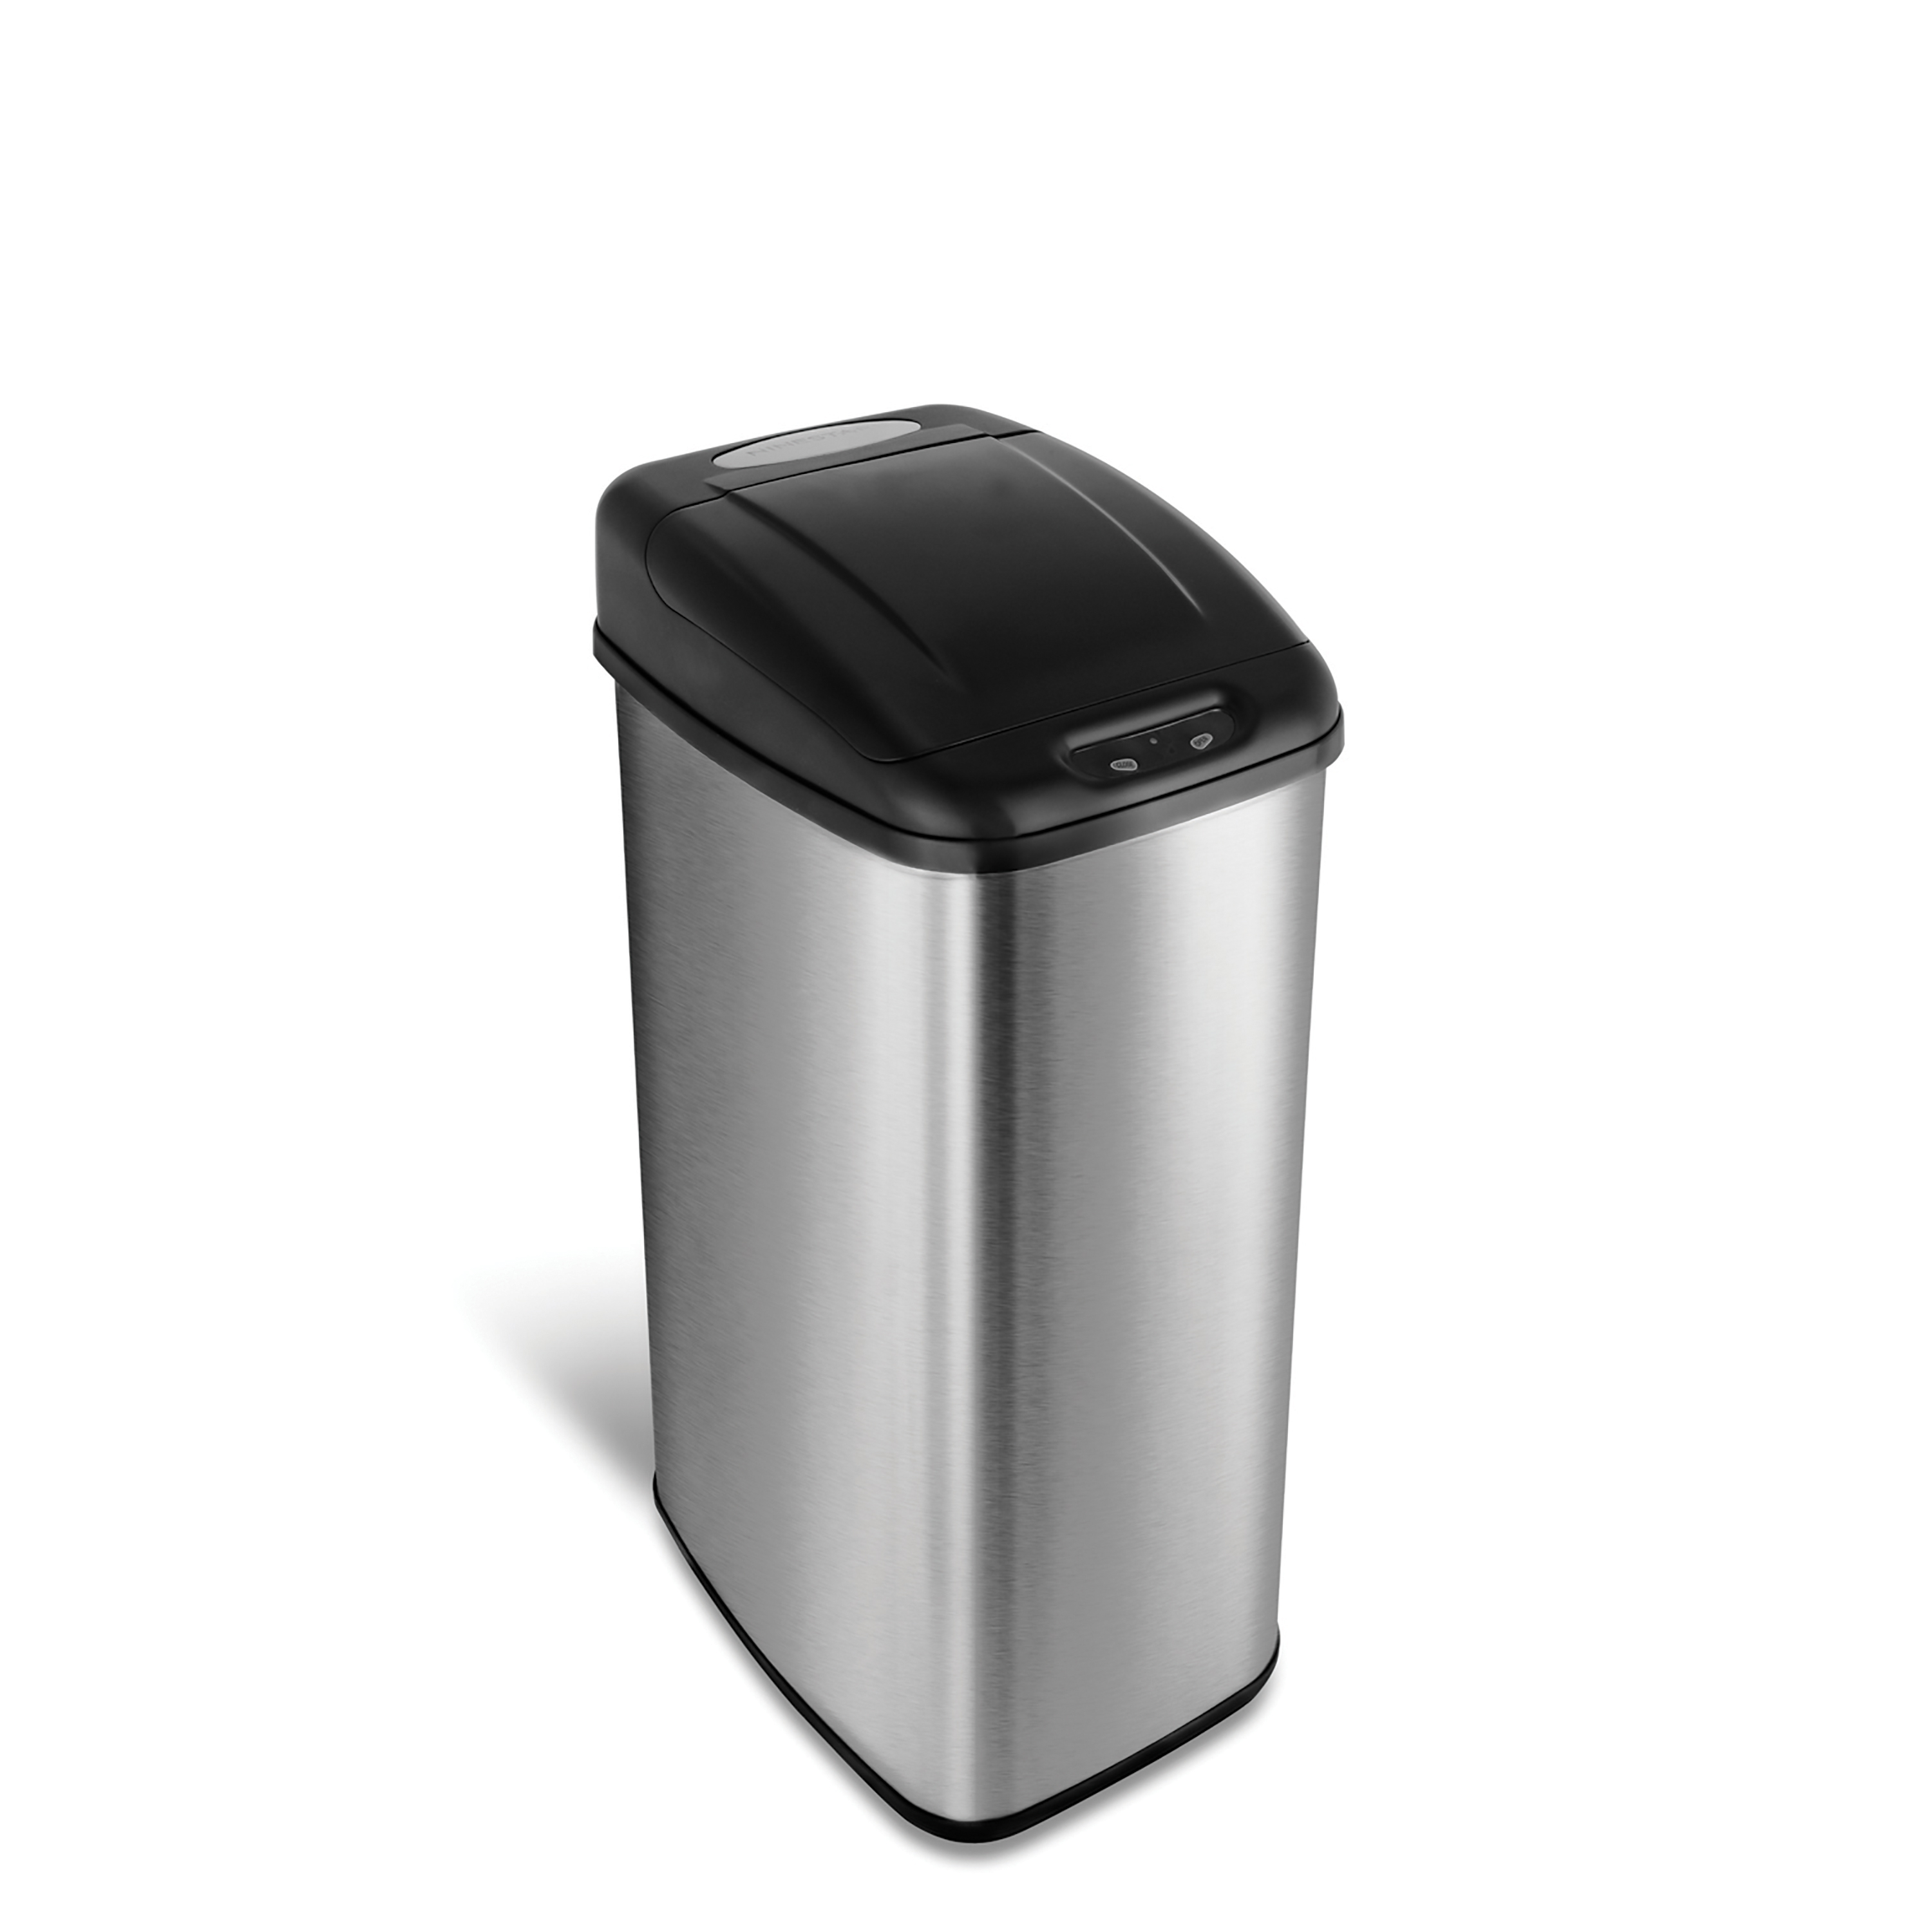 NineStars DZT-50-6 Touchless Stainless Steel 13.2 Gallon Trash Can - image 2 of 11